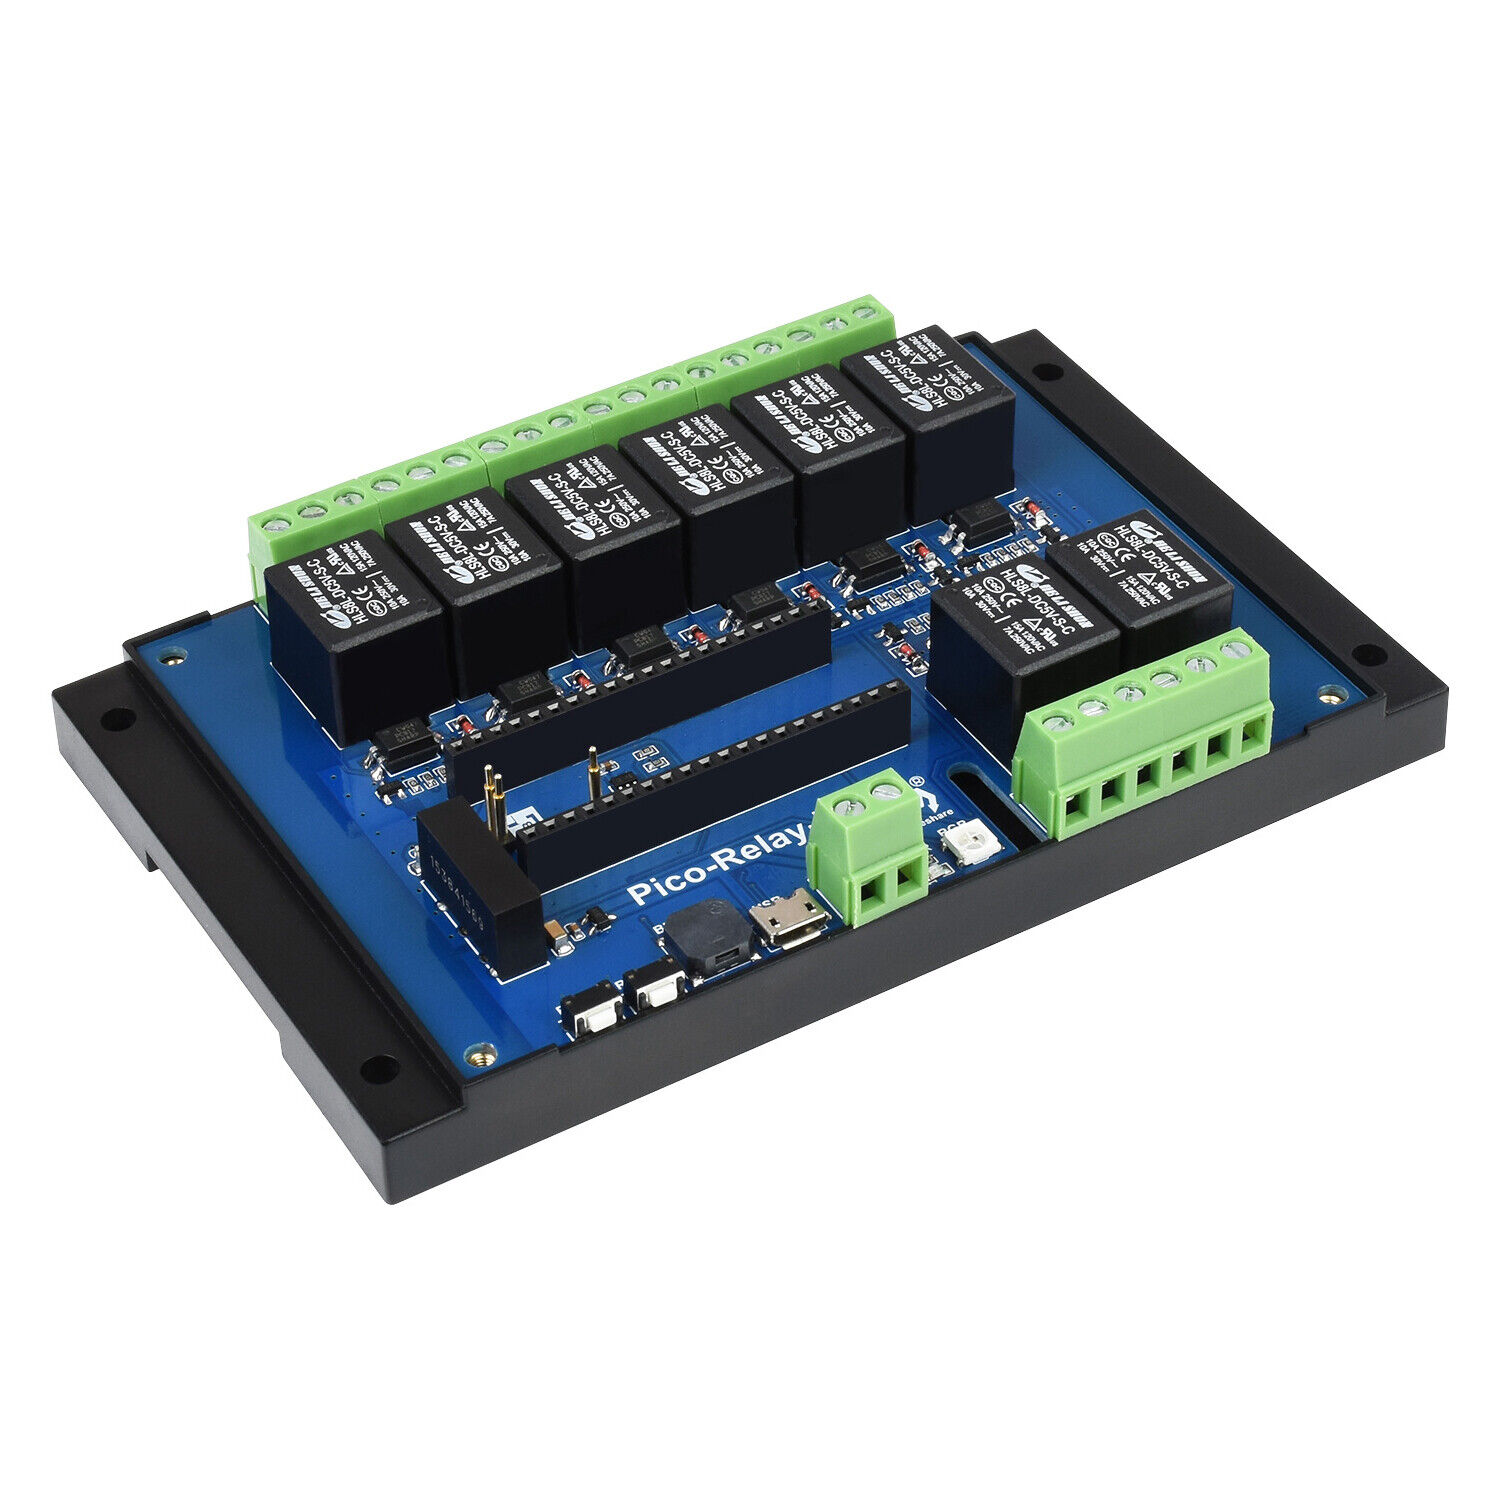 5V 8-CH Relay Expansion Breakout Module Kit for RPI Raspberry Pi Pico W WH Board